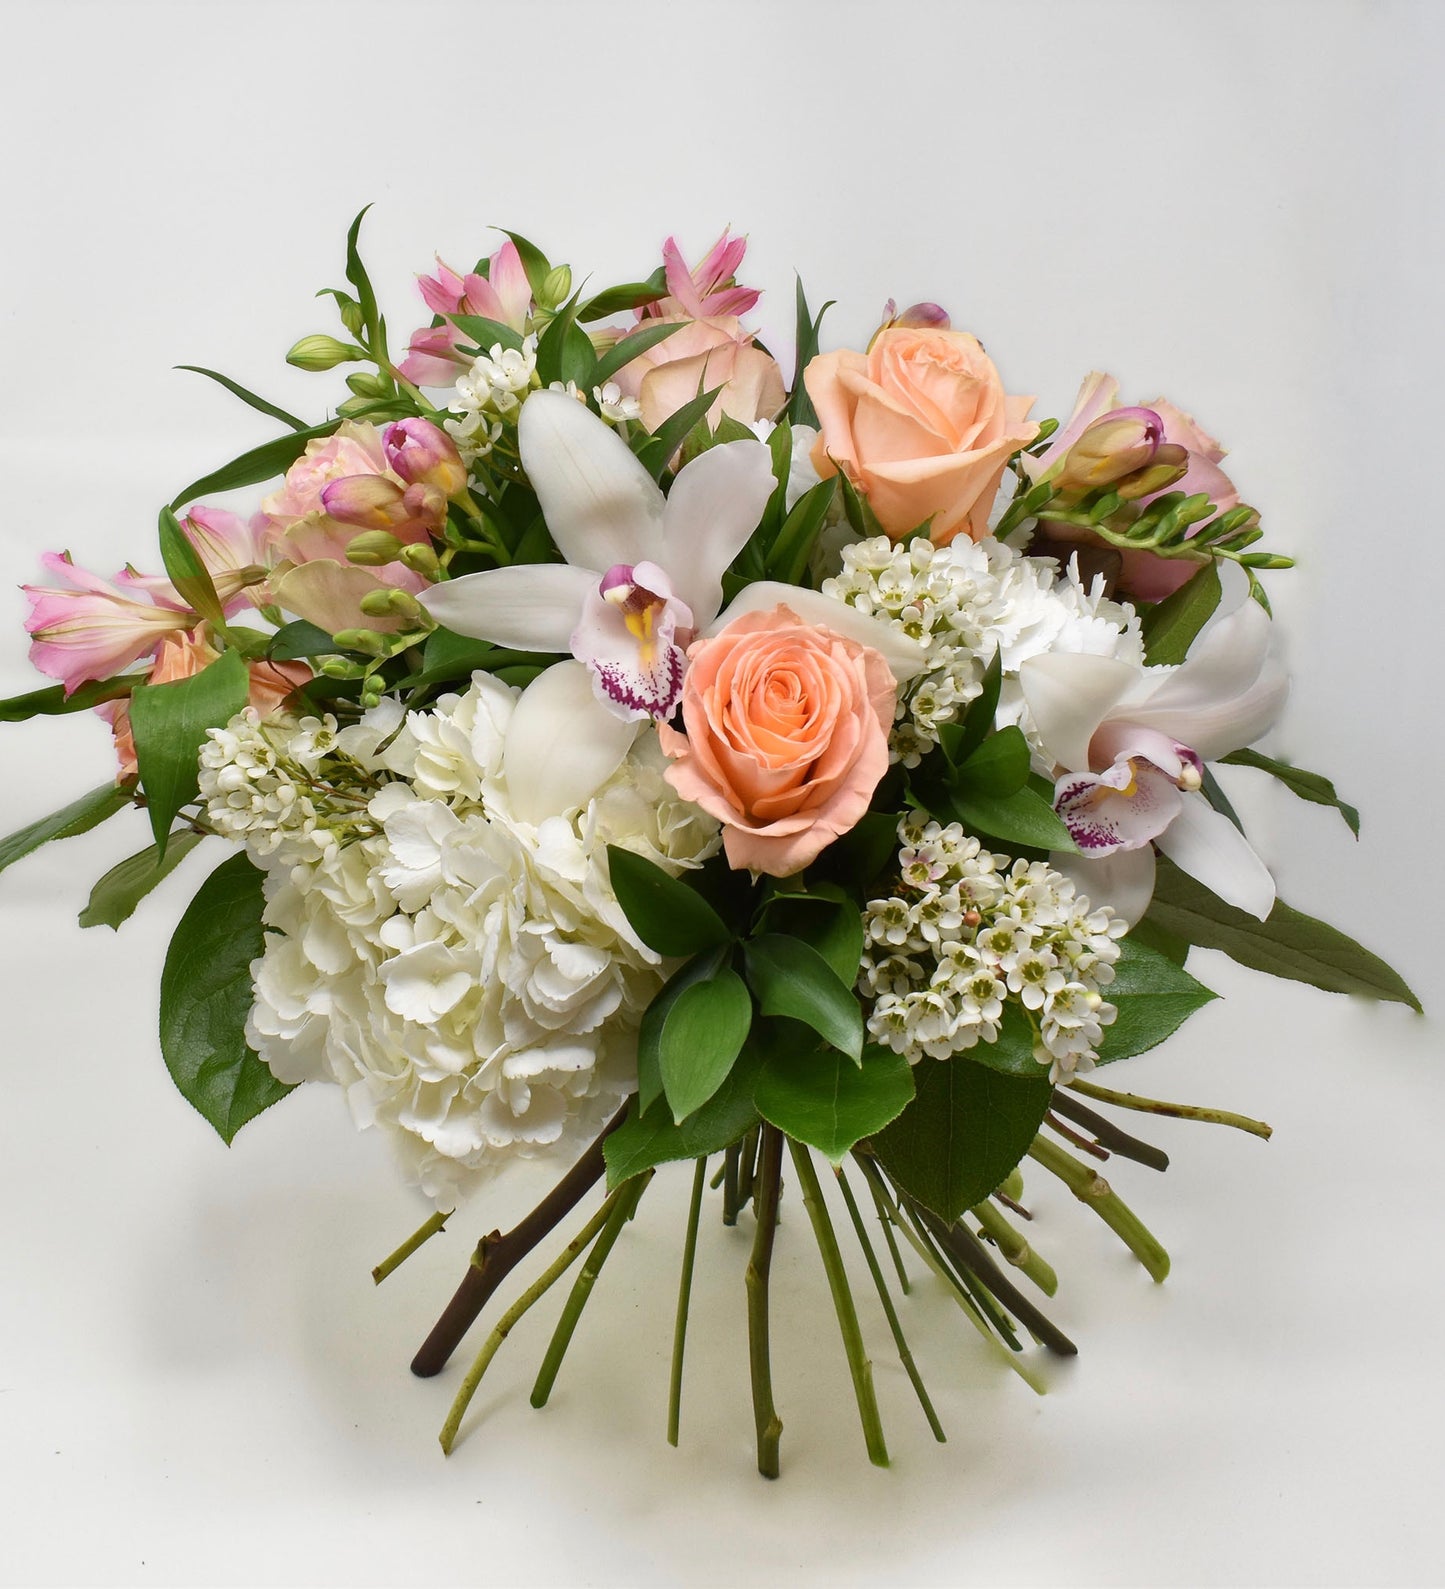 Bouquet with peach and light pink flowers and white hydrangea